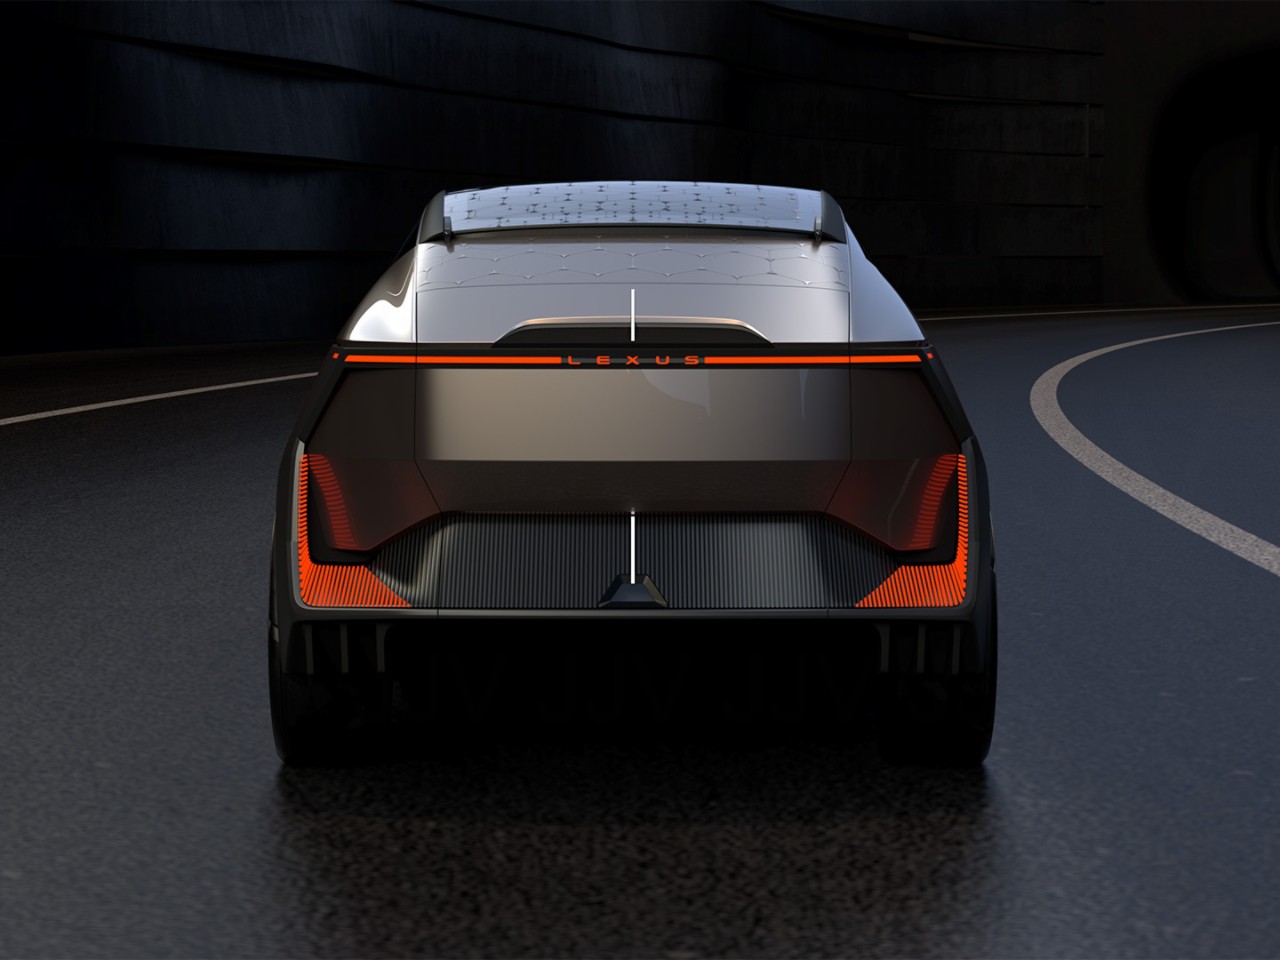 A rear view of the LF-ZL Concept car driving on a road